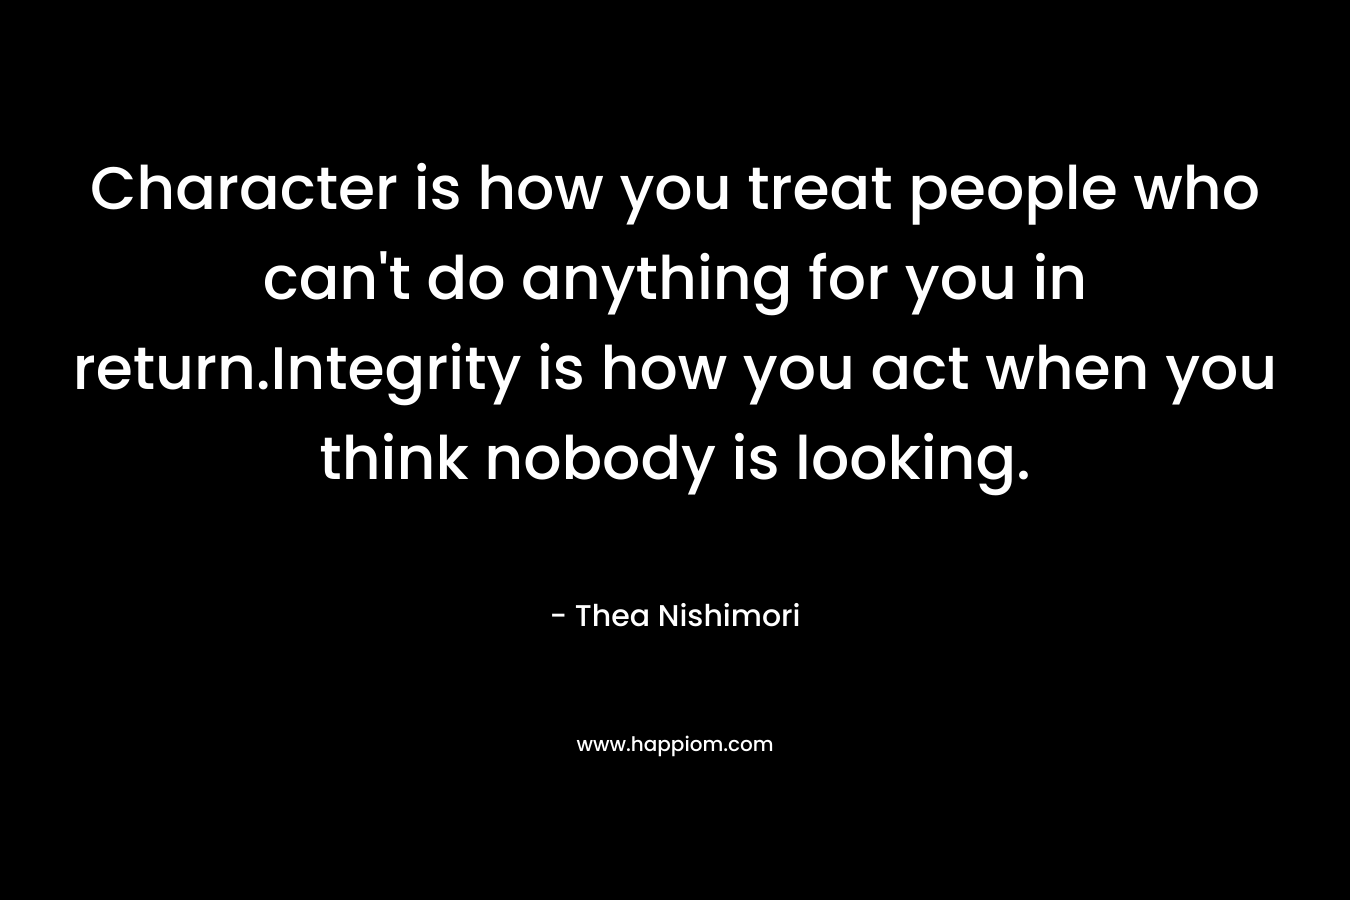 Character is how you treat people who can't do anything for you in return.Integrity is how you act when you think nobody is looking.